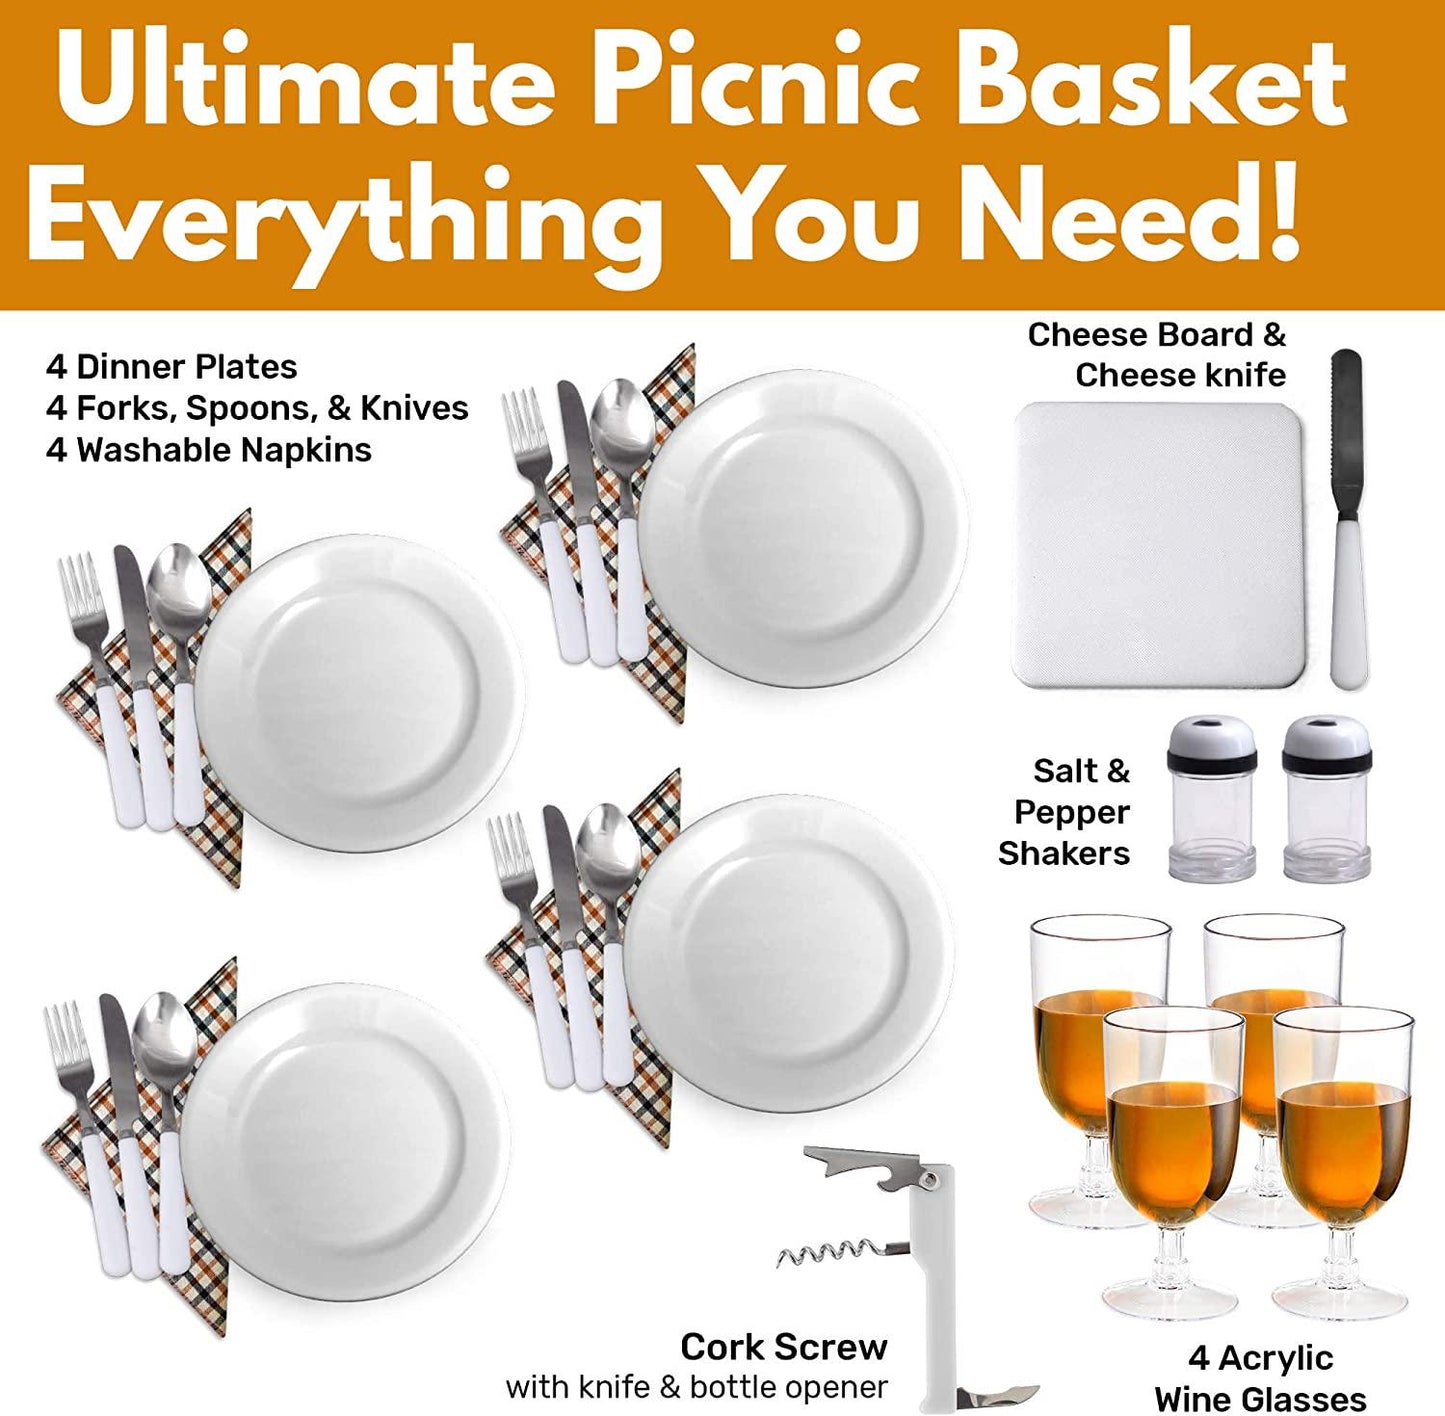 Picnic Basket Upgraded 2023 Model - Includes 4 Plates, Wine Glasses, Forks, Knives, Salt and Pepper Shakers, Wash Cloths and More -